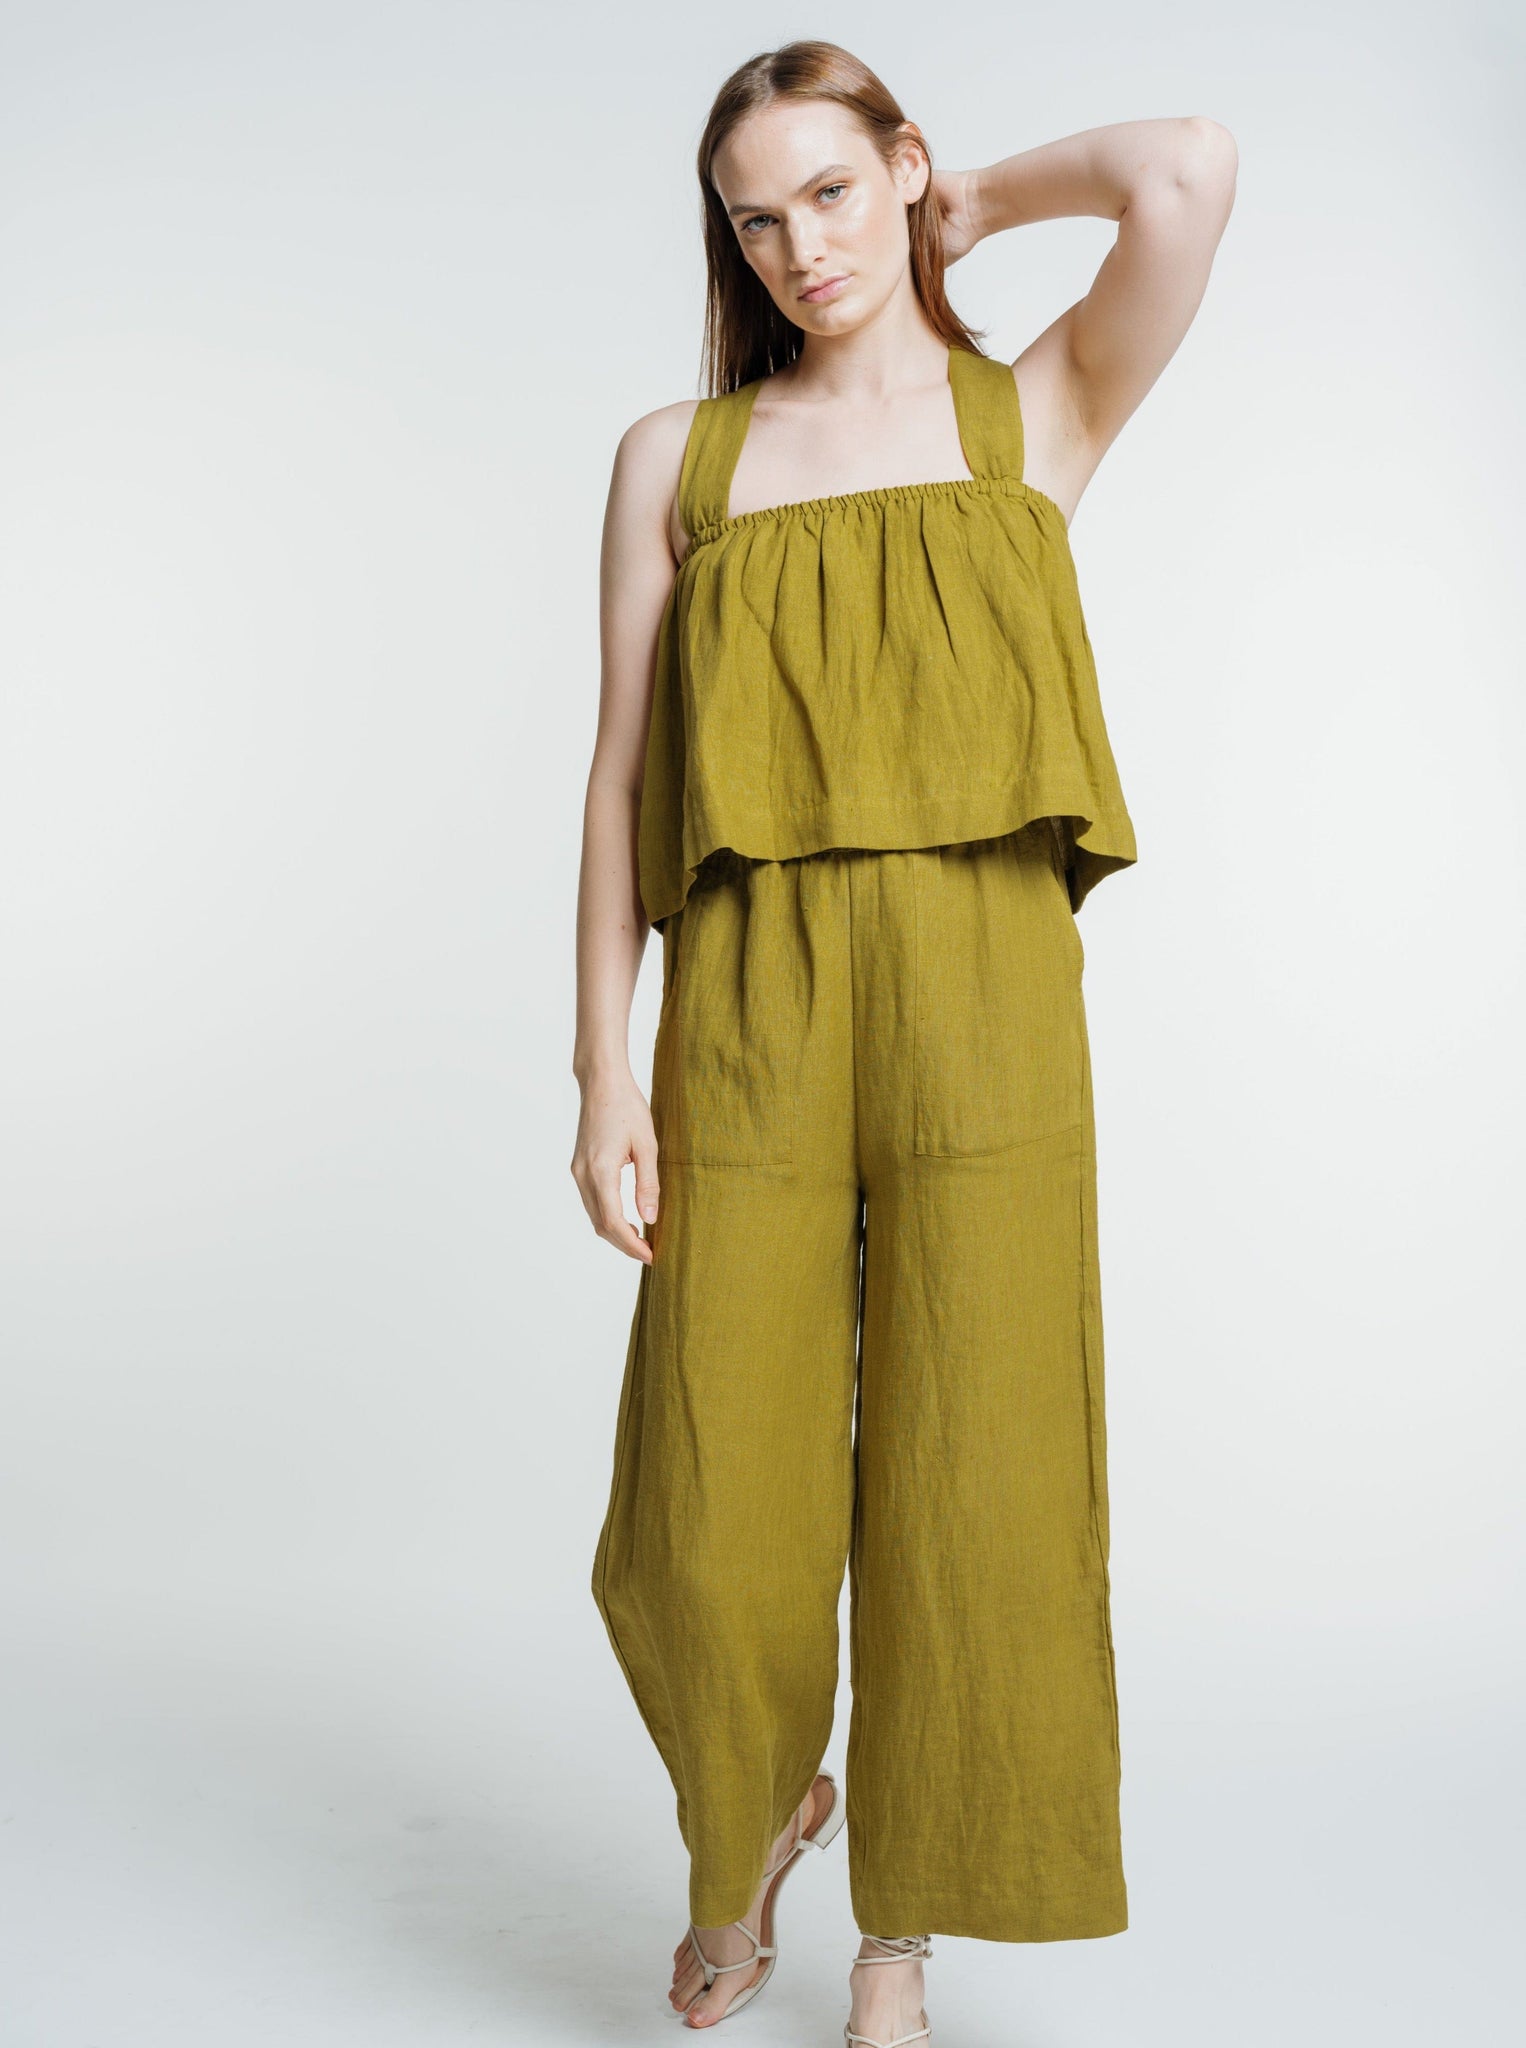 The model is wearing a high-waisted green Everyday Crop - Dried Tobacco - Sample jumpsuit.